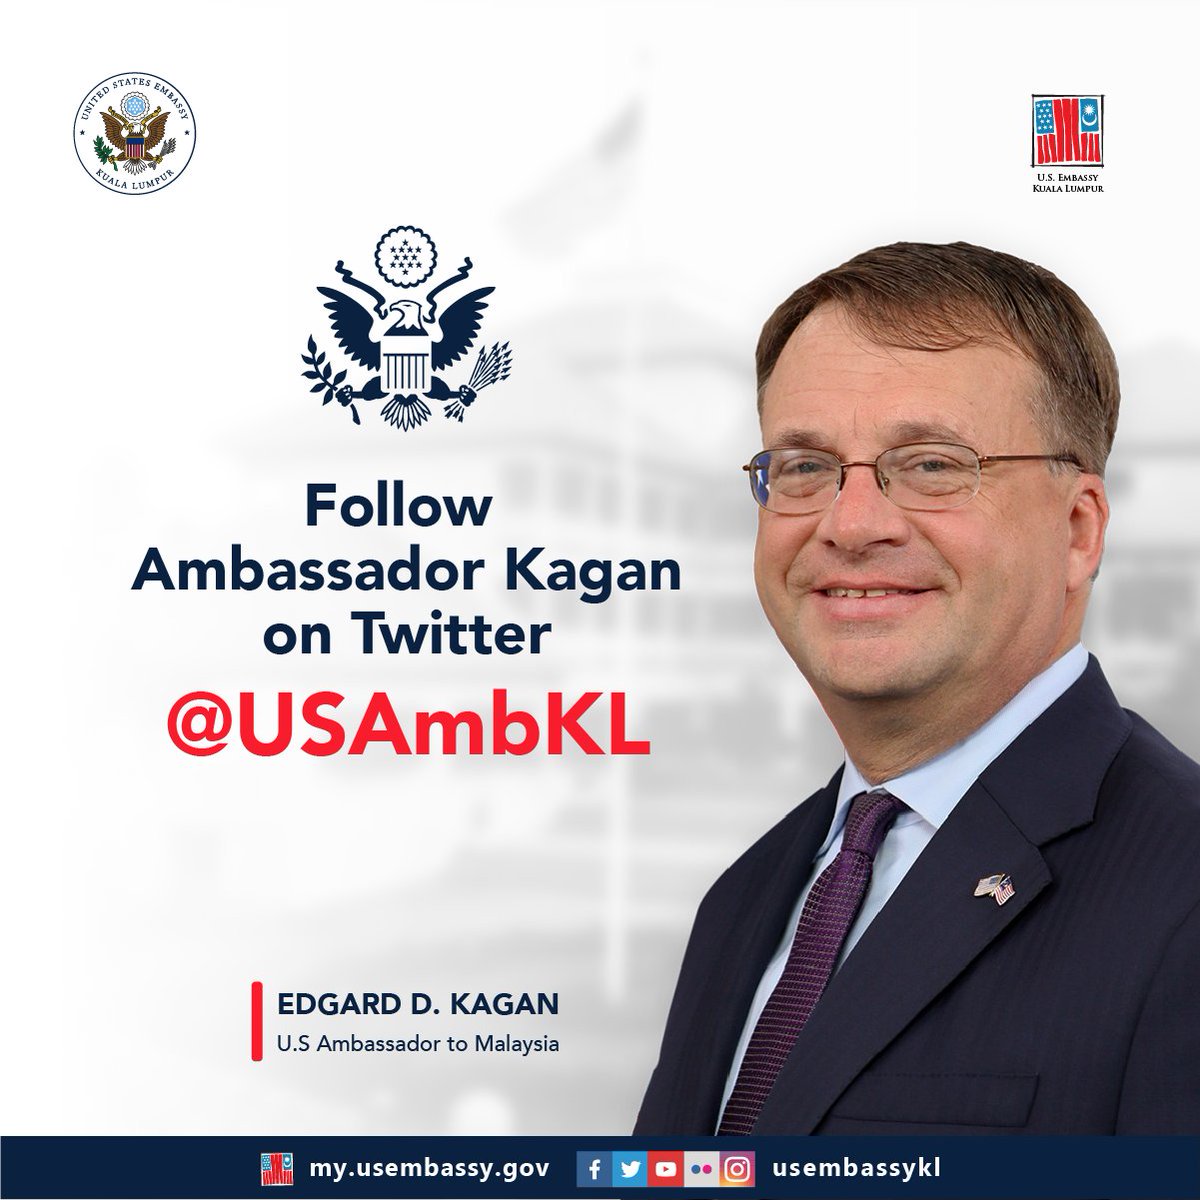 Ambassador Kagan is now on Twitter! Follow @USAmbKL for behind the scenes looks at life as a diplomat, his love for Malaysian culture, and his views on the U.S.-Malaysia bilateral relationship. #USMYSamaSama #AmbKagan